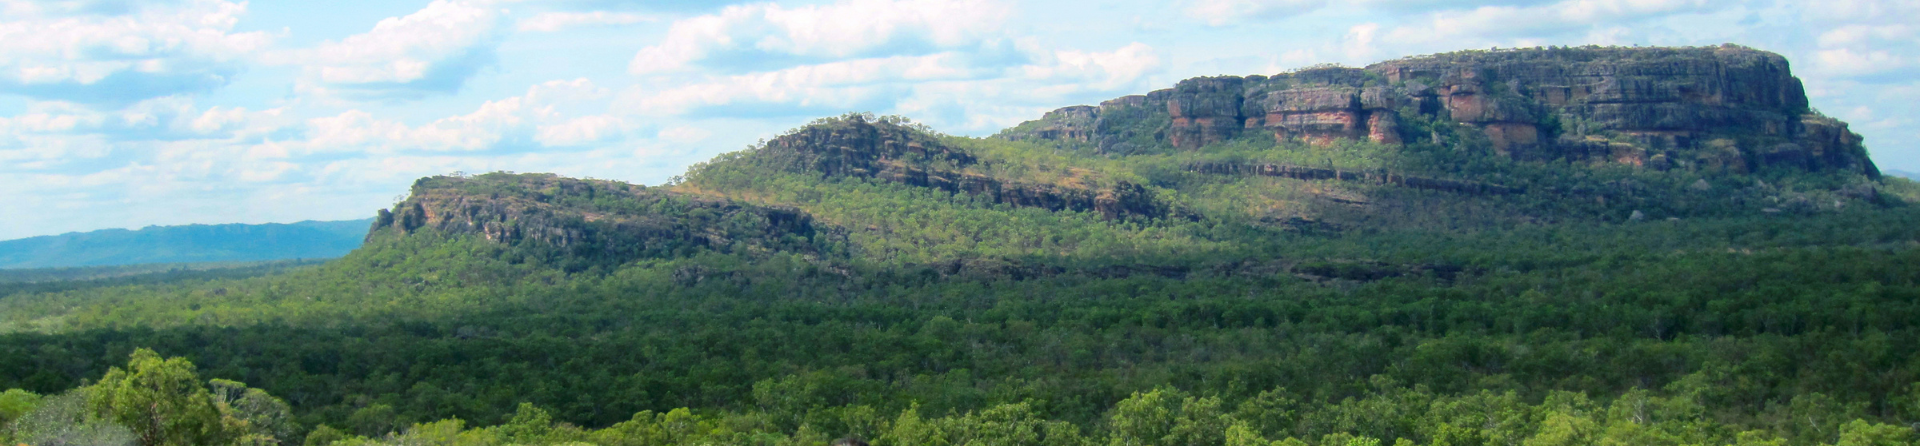 5 things to do in Kakadu National Park